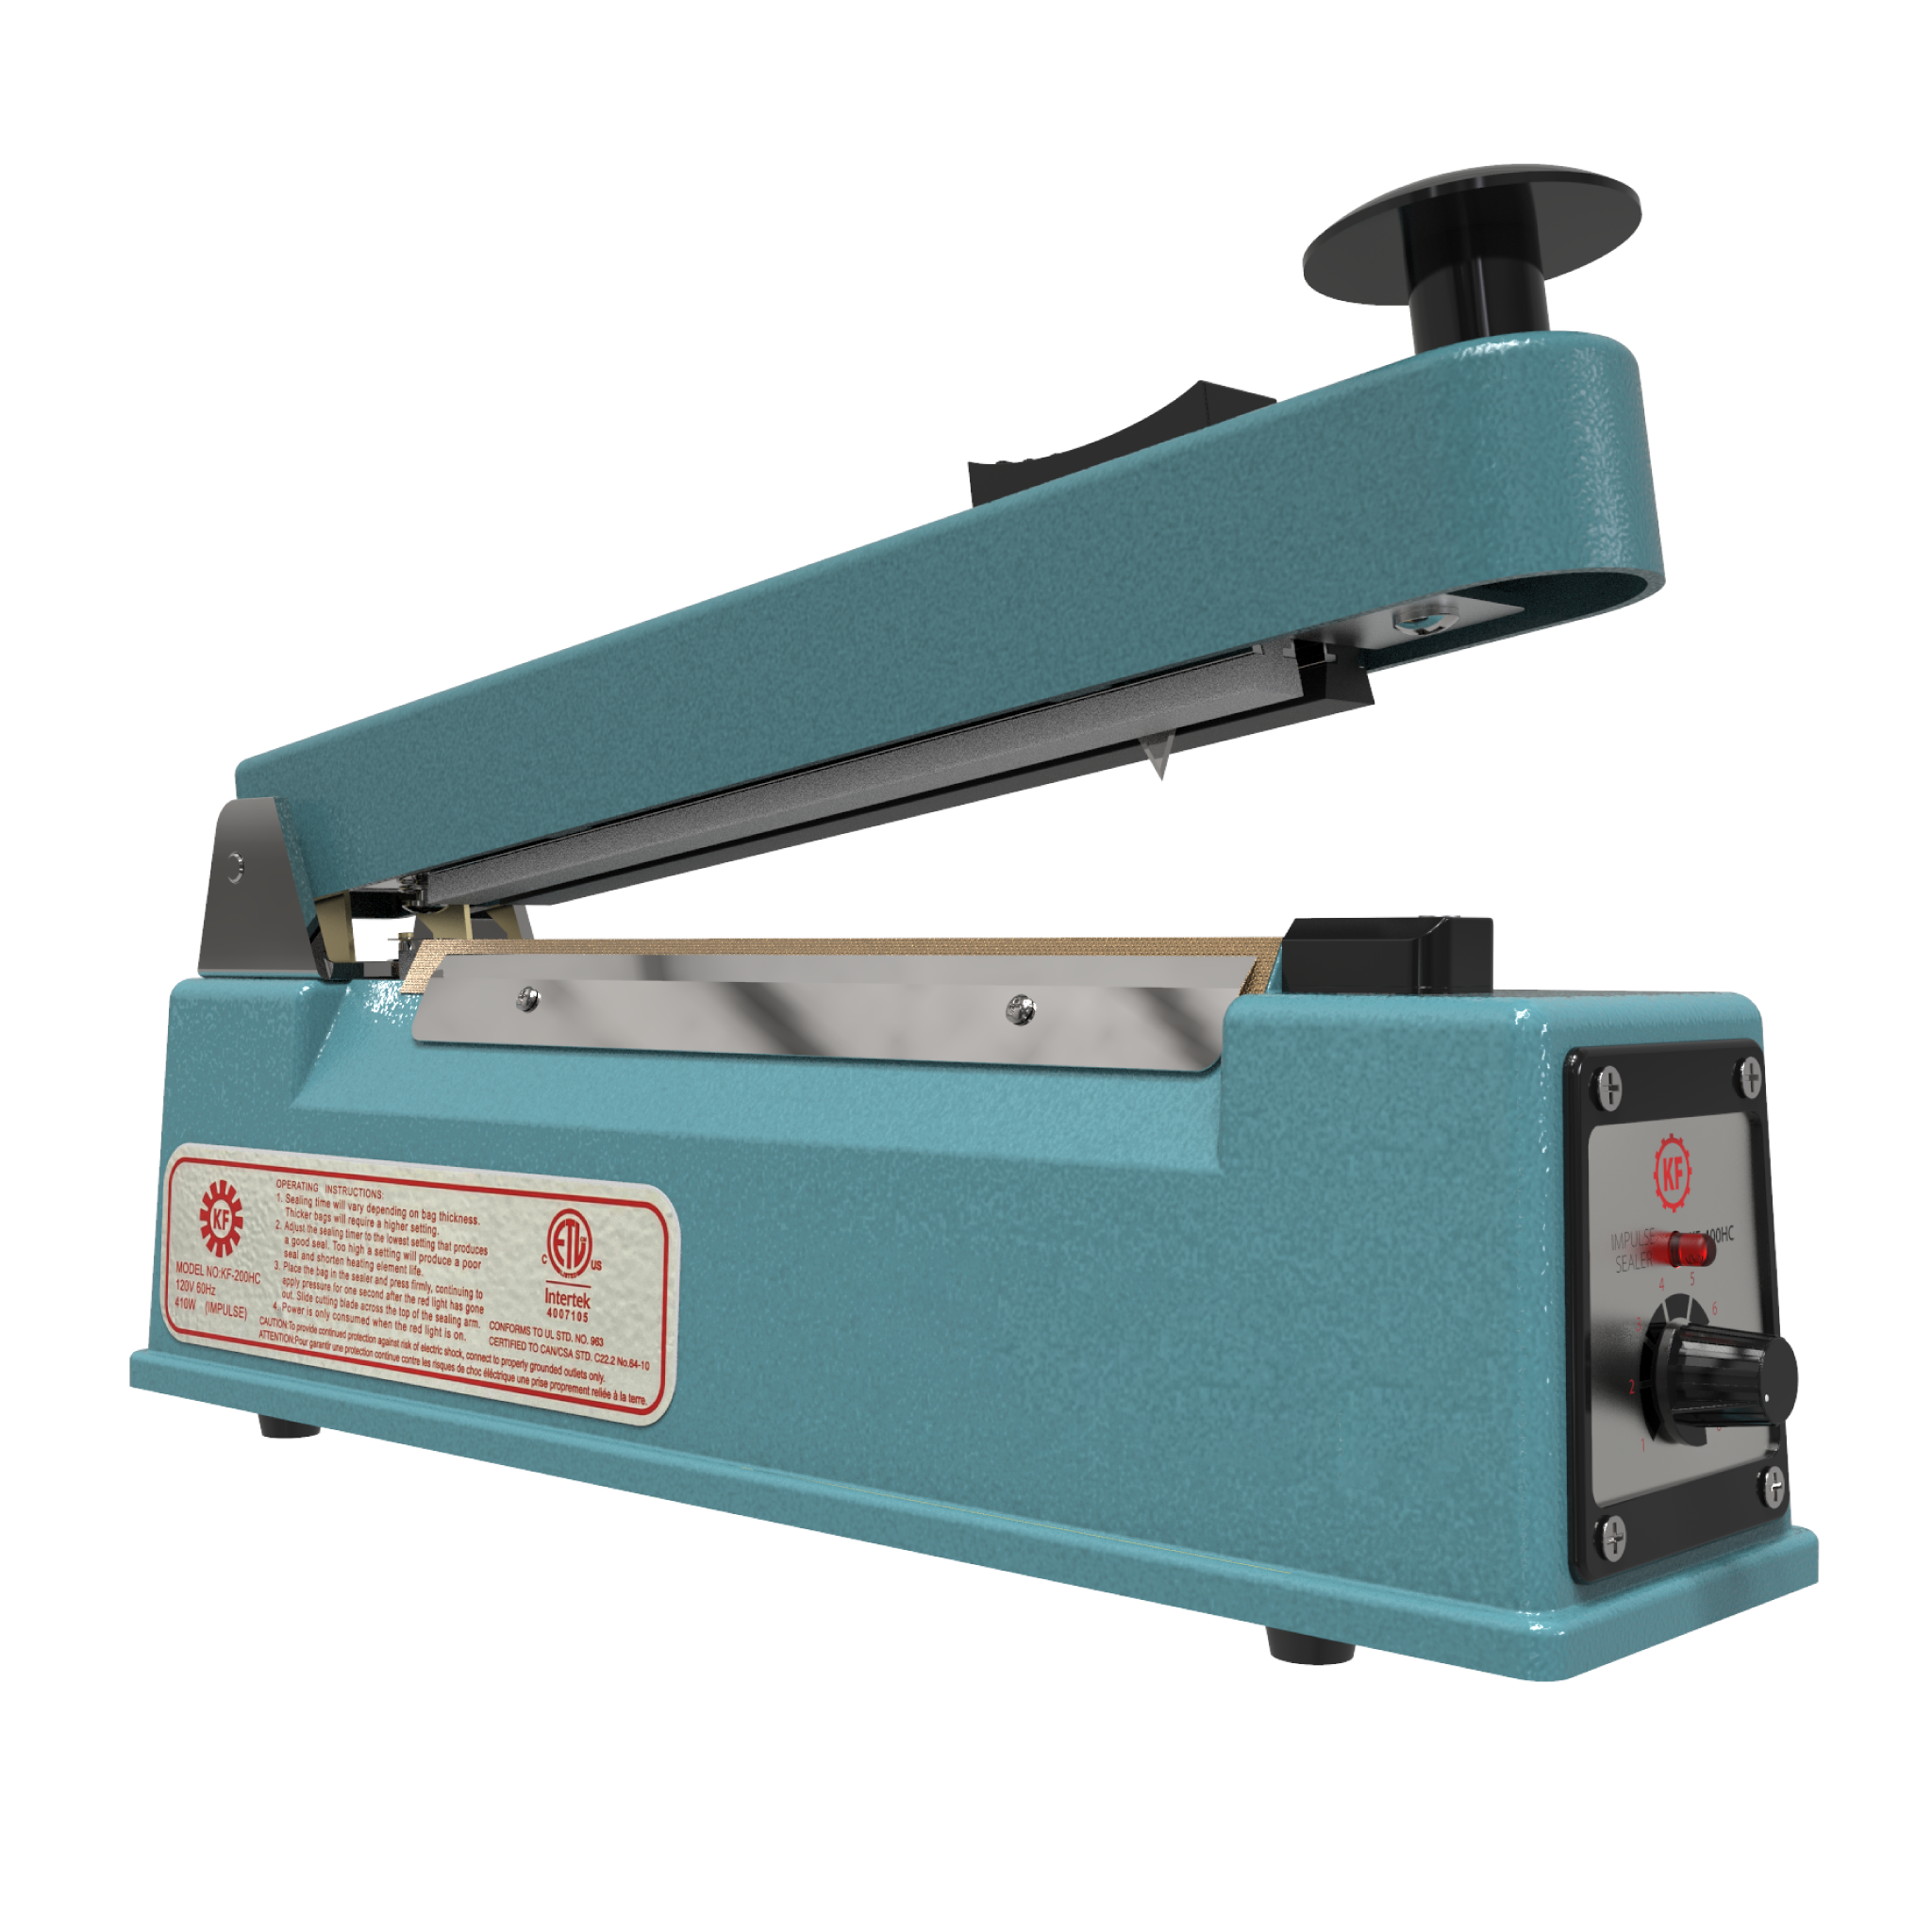 https://cdn.shopify.com/s/files/1/0517/5692/5094/products/8-Inch-Manual-Impulse-Sealer-With-Cutter-UL-listed-E-KF-200HC-Jorestech-H-_1.png?v=1674147404